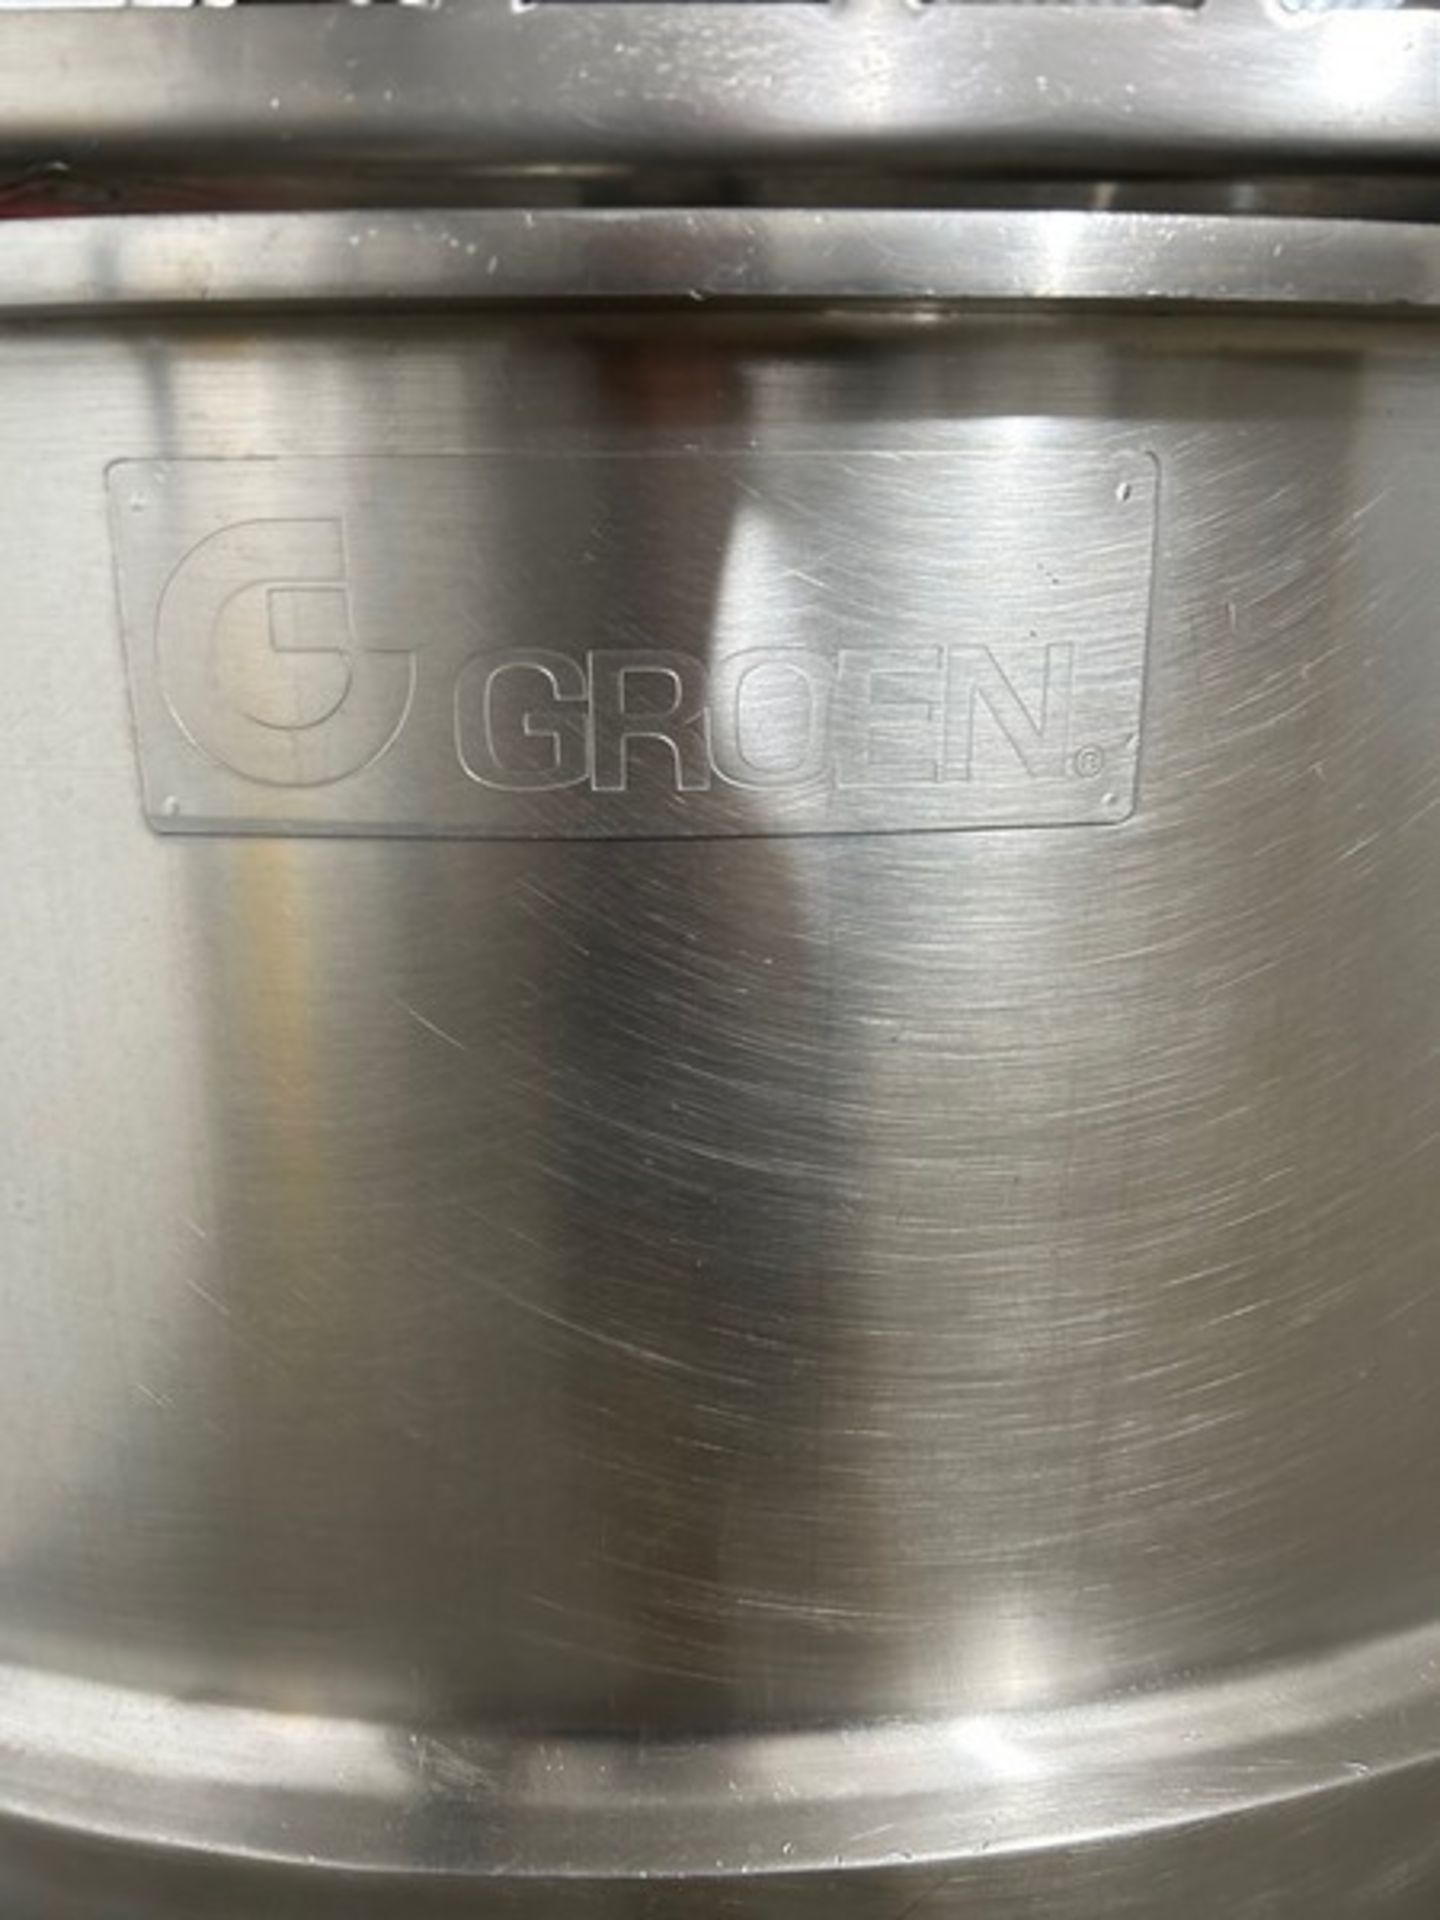 Groen 200 Gal. Sanitary S/S Jacketed Mixing Kettle with Sweep, Scrape Mixer (Located Rahway, NJ) - Image 3 of 4